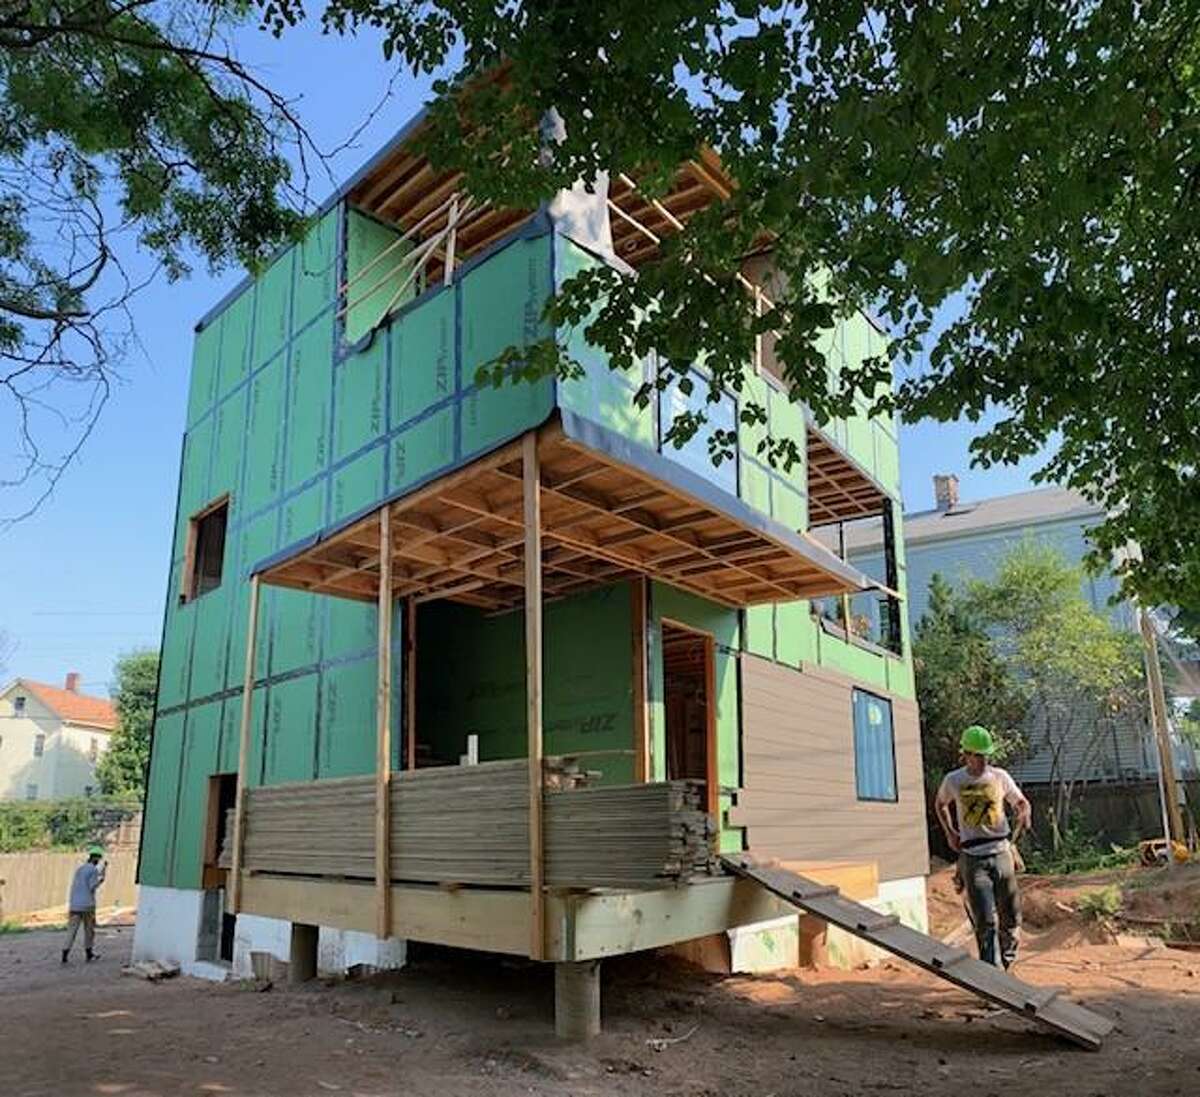 A triplex nearing completion on Plymouth Street in New Haven, designed and being built by first-year students at the Yale School of Archtecture as part of the Jim Vlock Building Project.